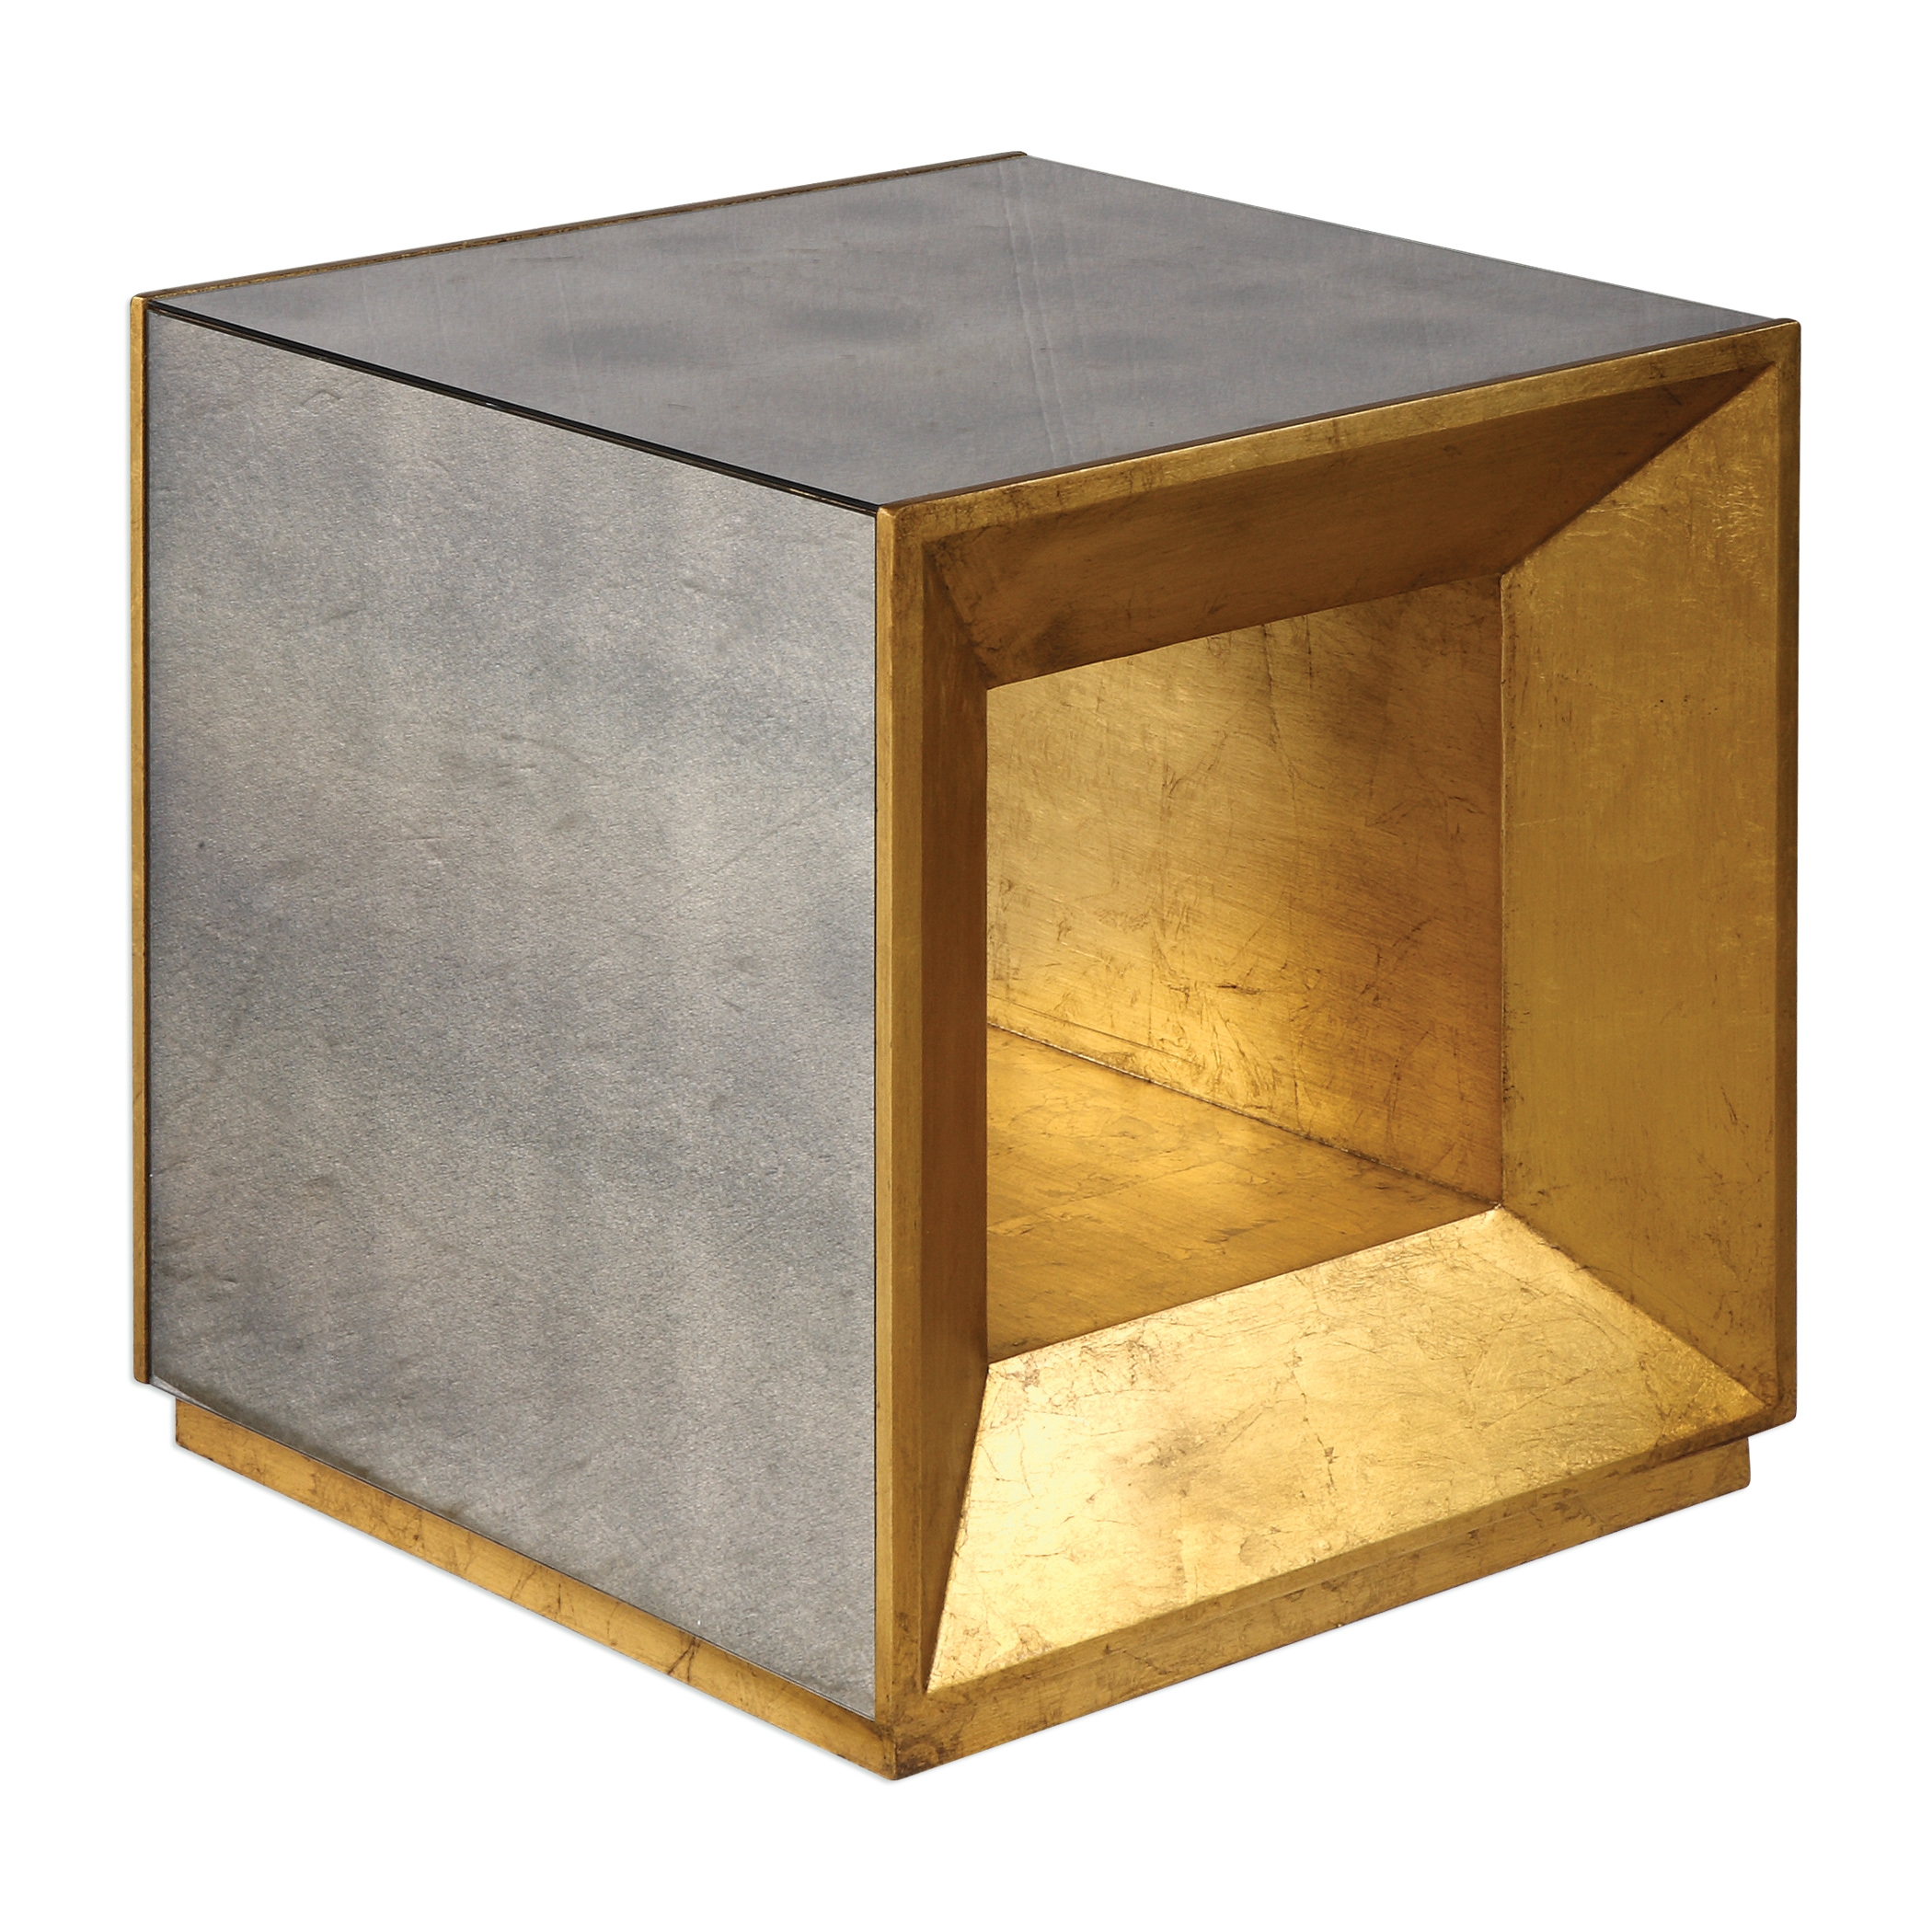 Flair Gold Cube Table - Image 4